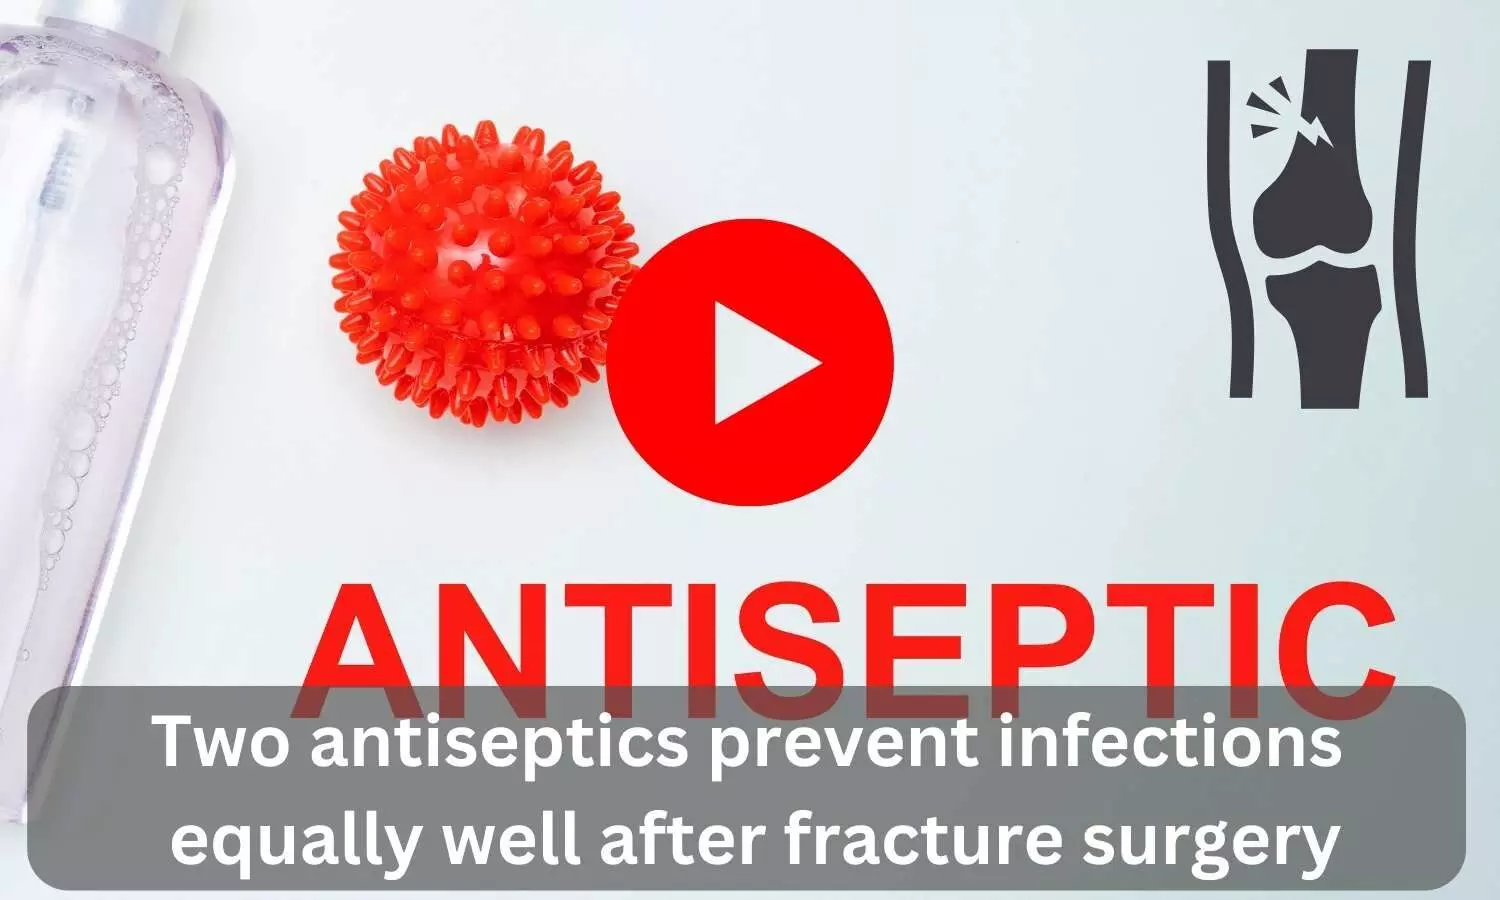 Two antiseptics prevent infections equally well after fracture surgery